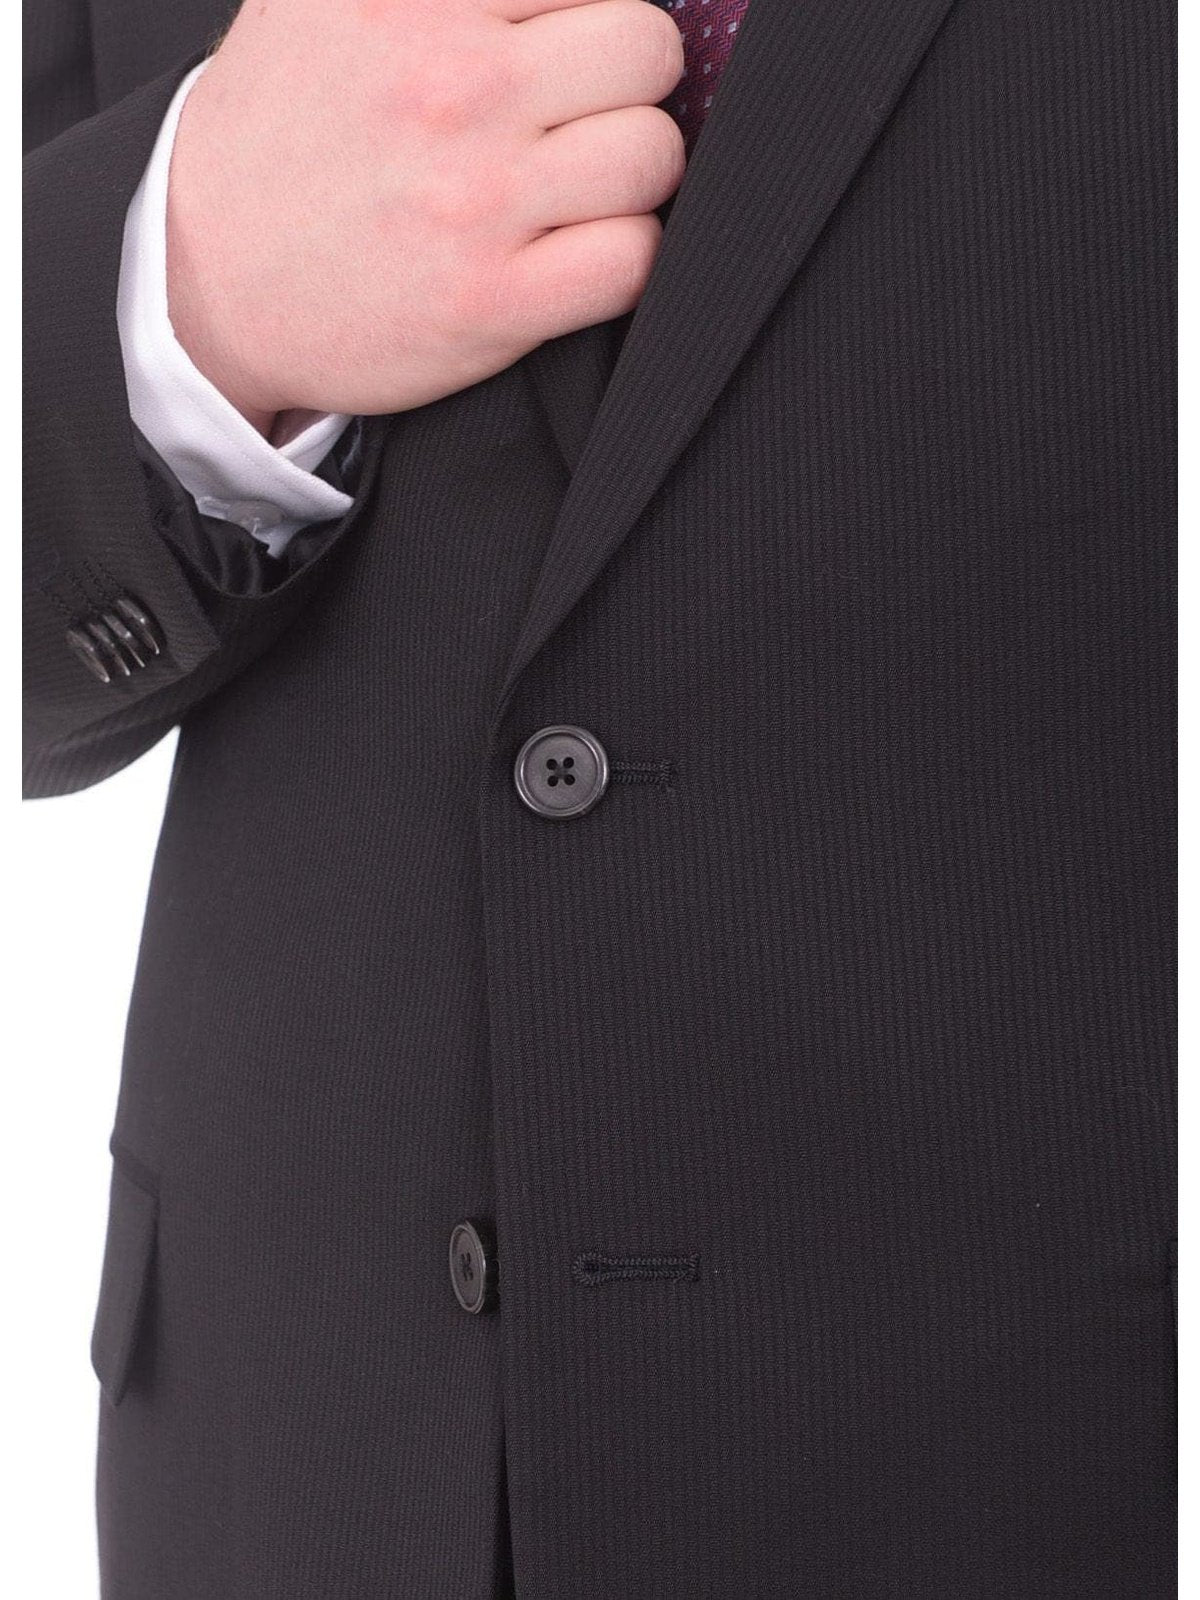 Lazetti Couture Sale Suits Lazetti Couture Portly Fit Black Tonal Striped Two Button Wool Suit